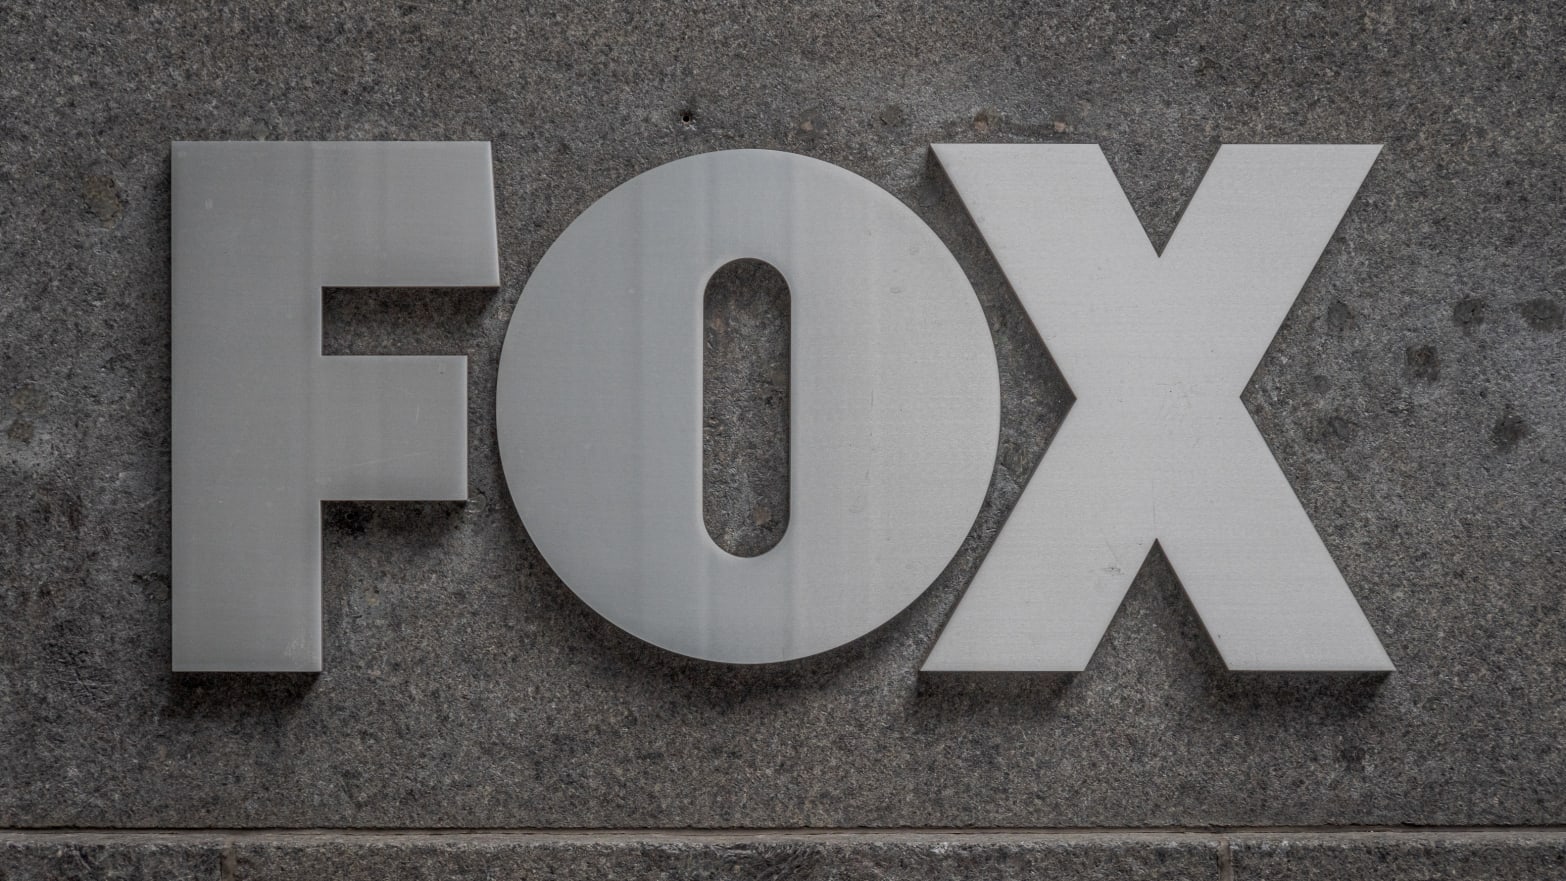 Plaque at the main entrance to the FOX News Headquarters at NewsCorp Building in Manhattan.